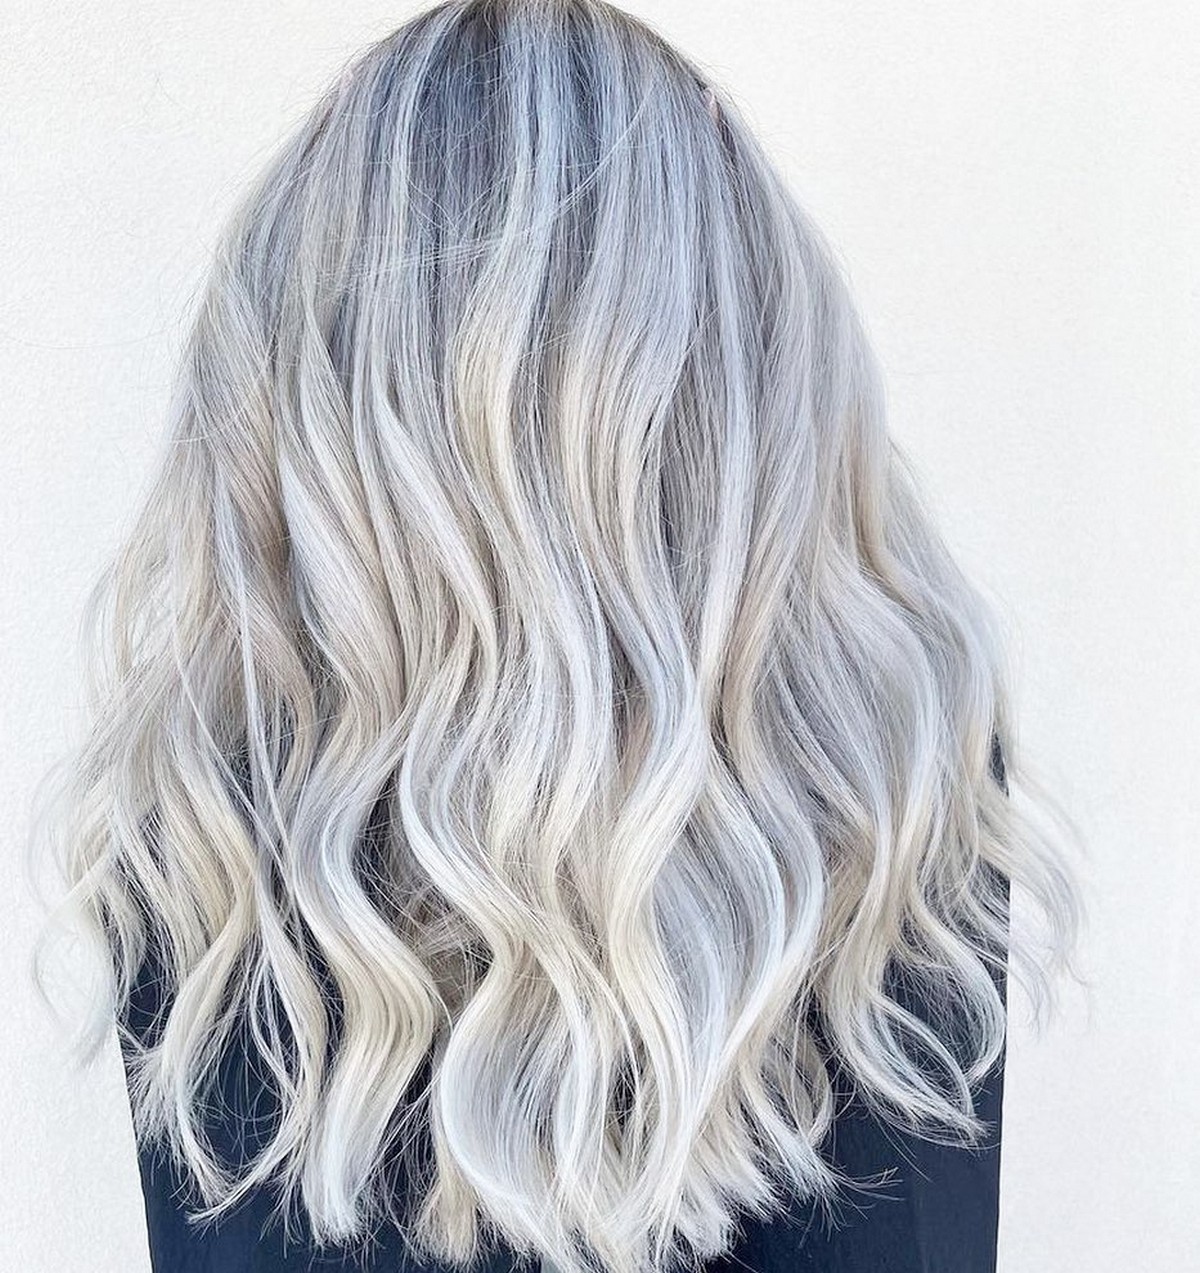 Icy Silver Blonde Highlights On Black Hair